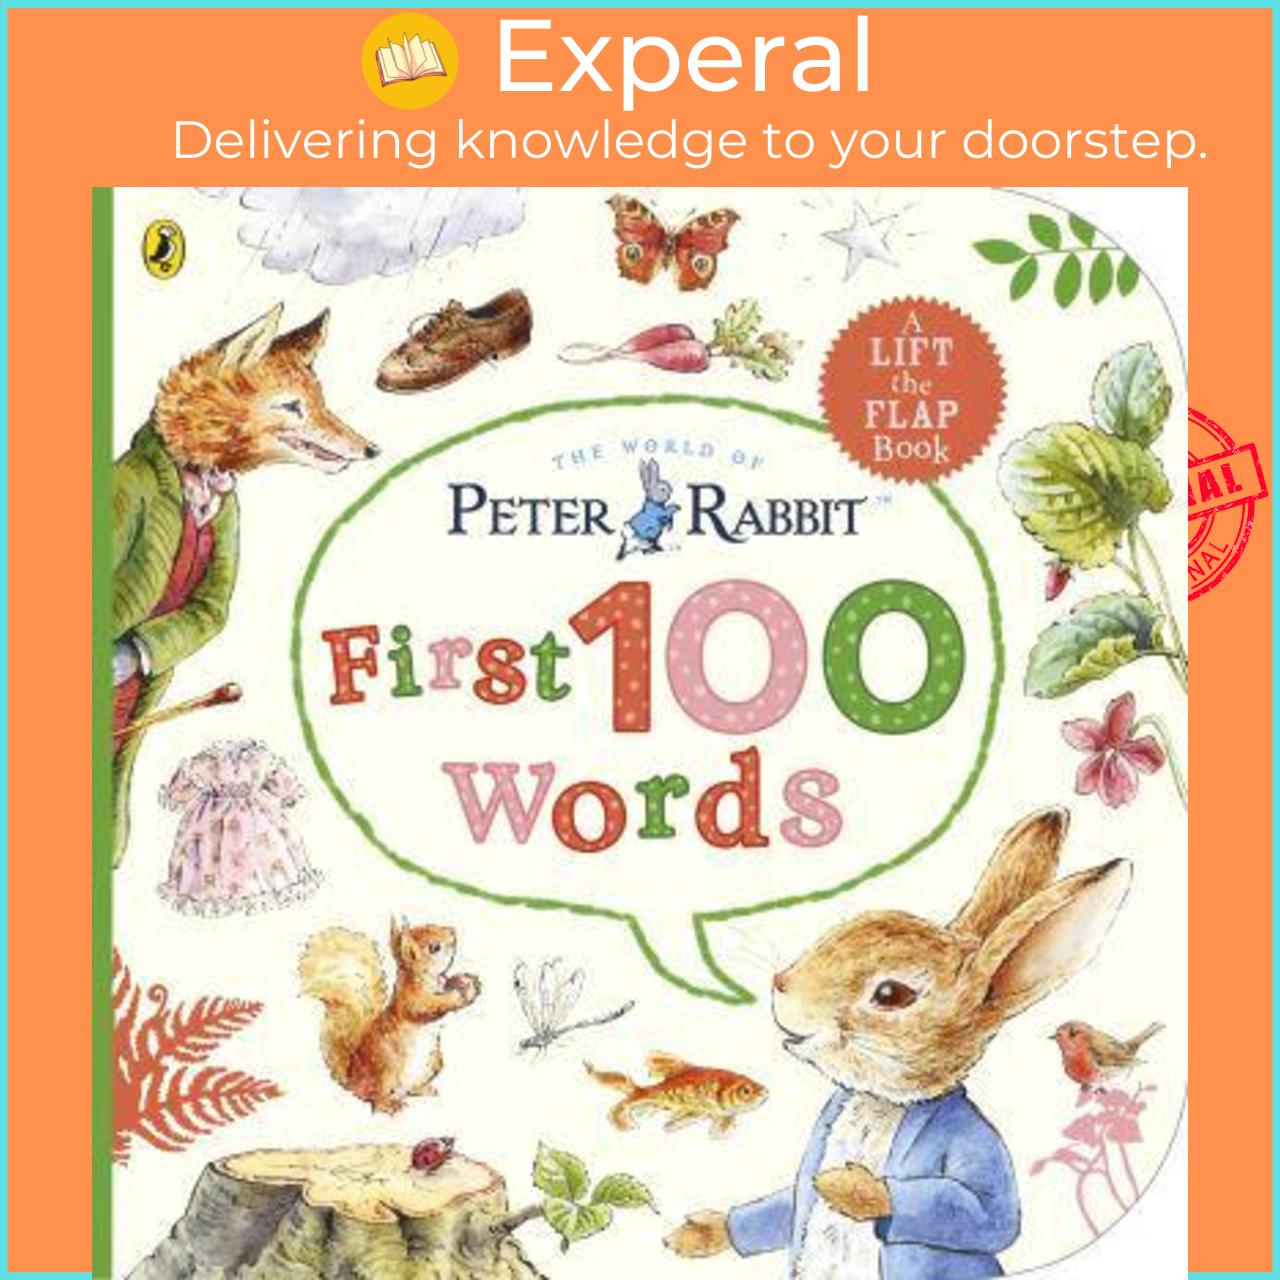 Sách - Peter Rabbit Peter's First 100 Words by Beatrix Potter (UK edition, Board Book)